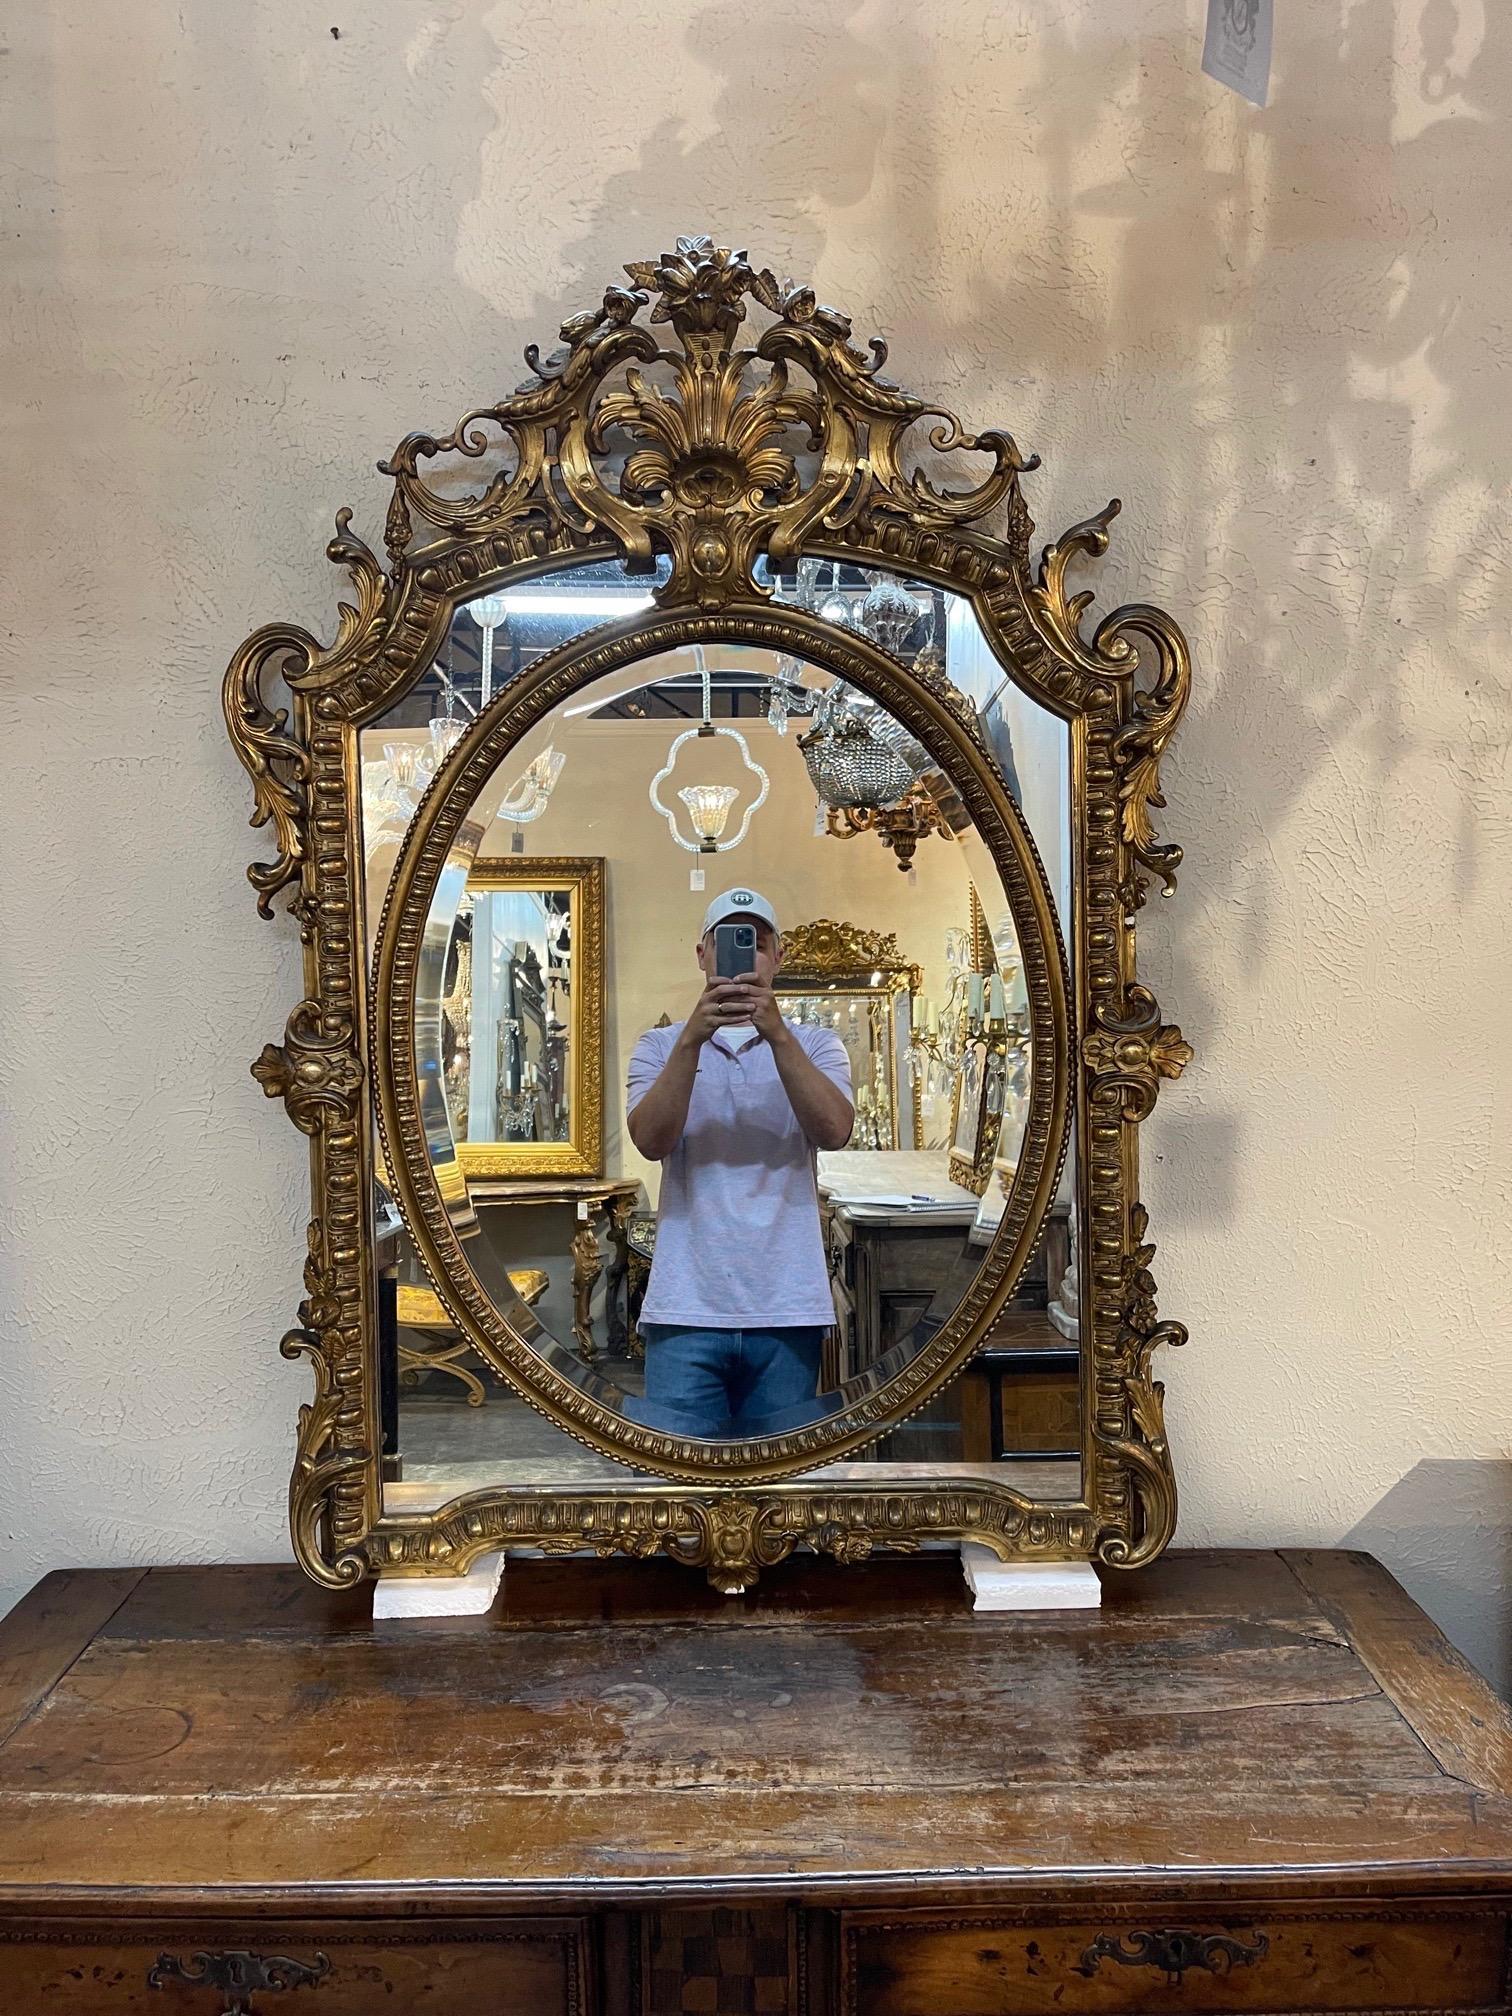 Elegant large scale 19th century French Louis XV style carved and giltwood mirror. Very fine carvings of leaves and flowers and an elaborate crest at the top. Exquisite!